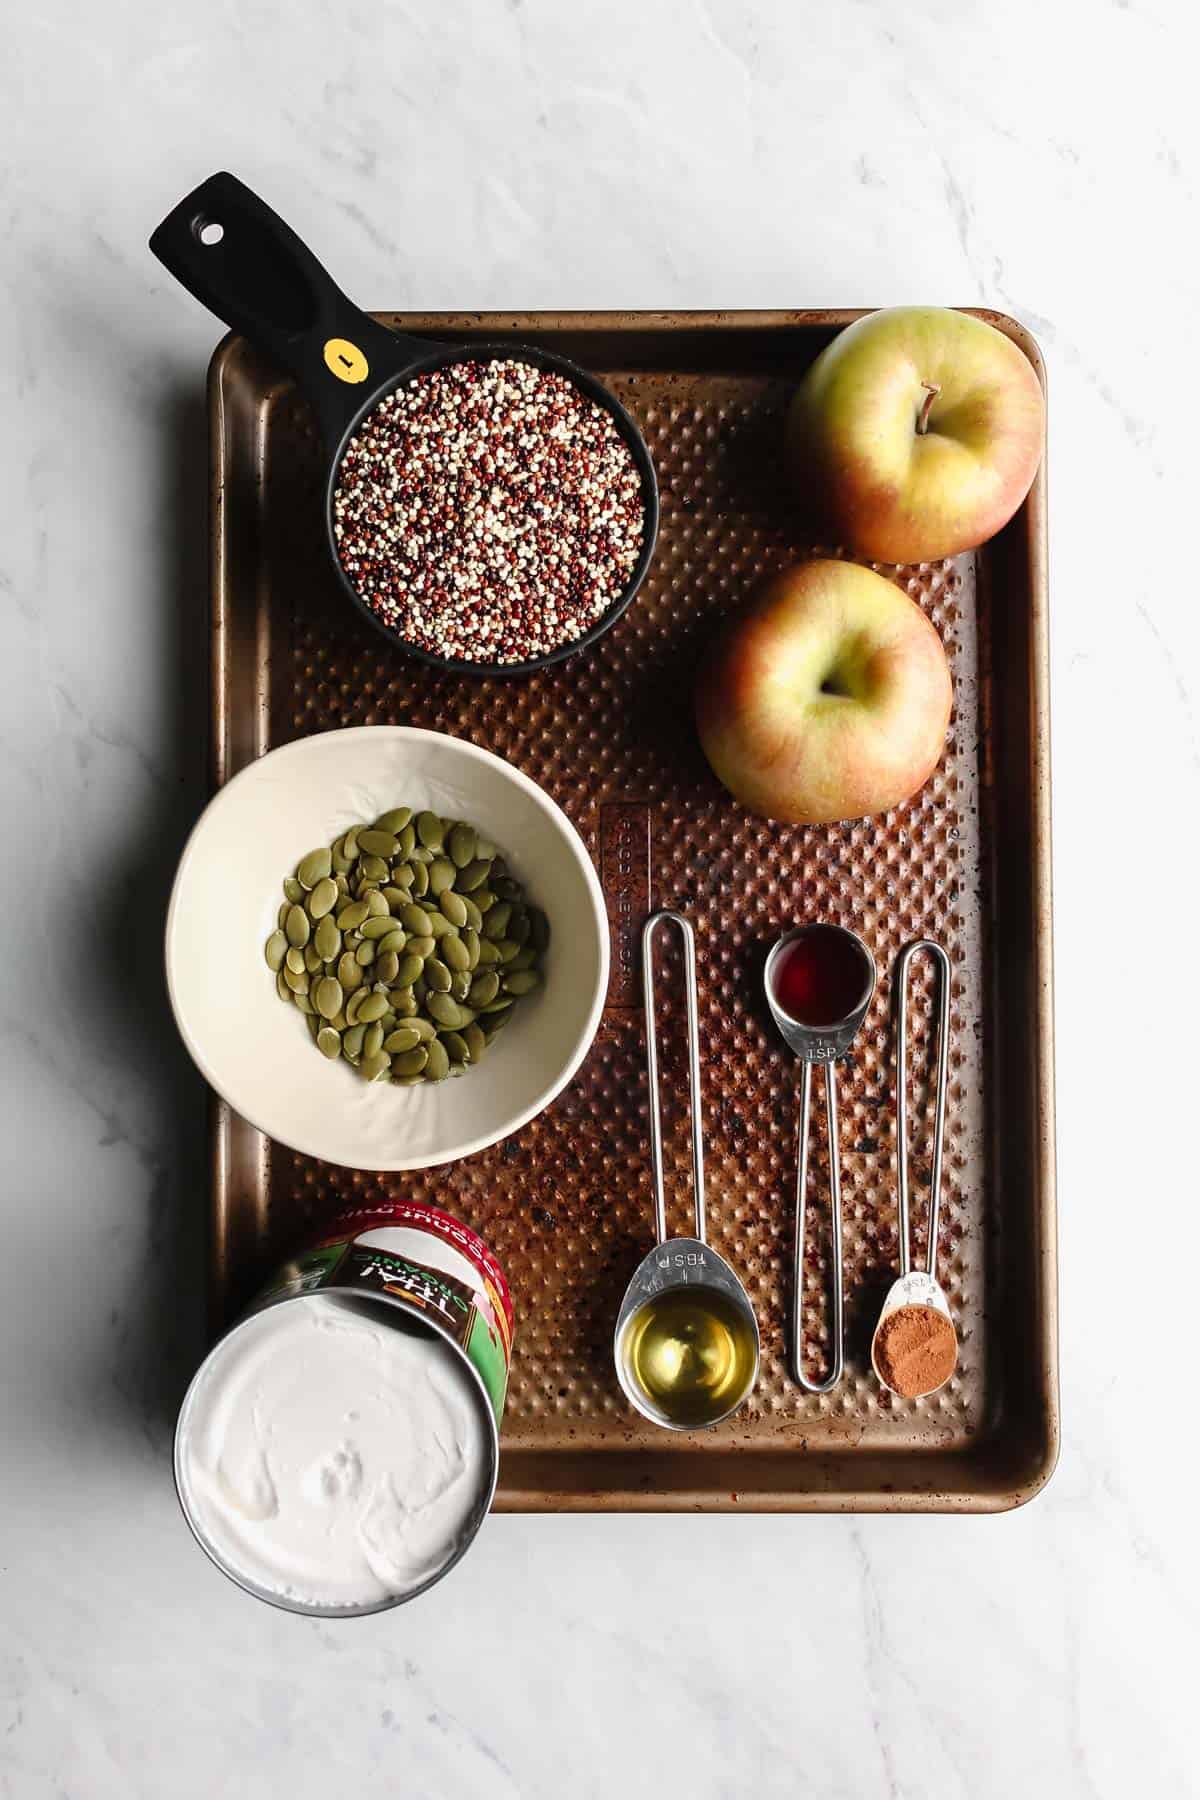 Overhead view of all of the ingredients on a baking sheet which is sitting on a marble background. 2 small apples, uncooked quinoa in a black measuring cup, raw pepitas in white bowl, opened can of coconut milk, 3 measuring spoons that contain cinnamon, avocado other oil, and vanilla extract.